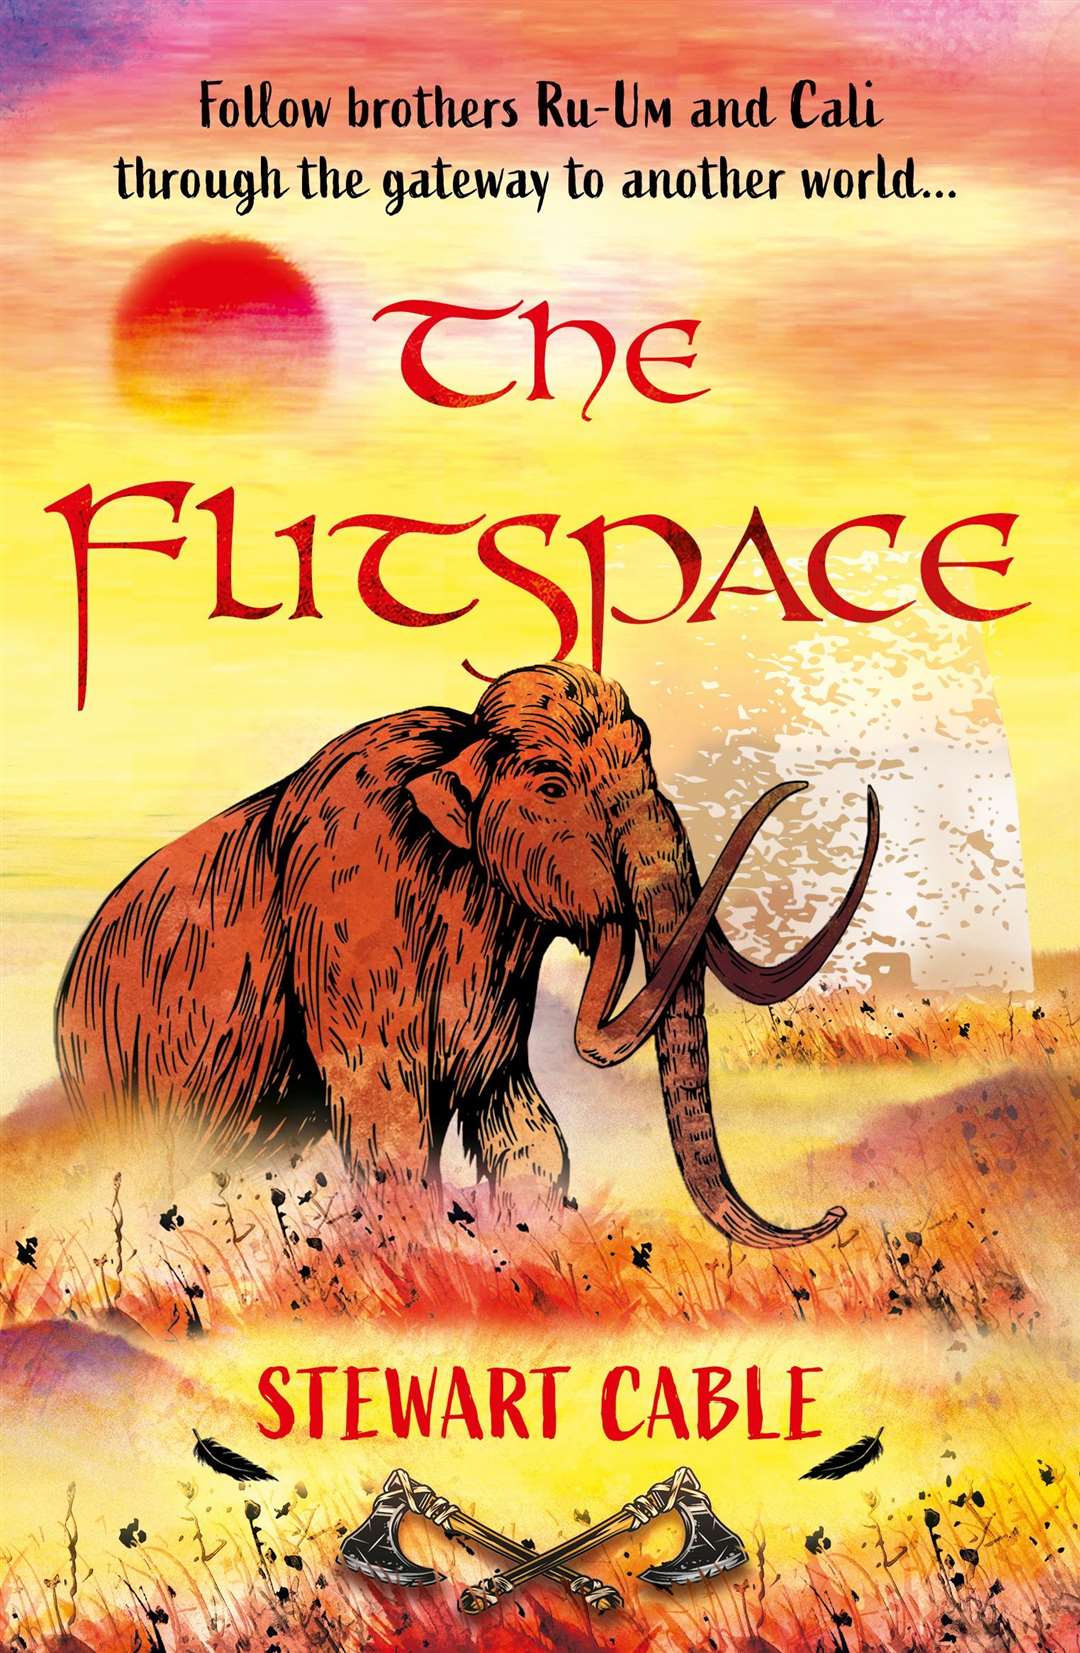 The Flitspace explores the possibilities of new worlds and universes as well as encouraging readers to think about the world around us.